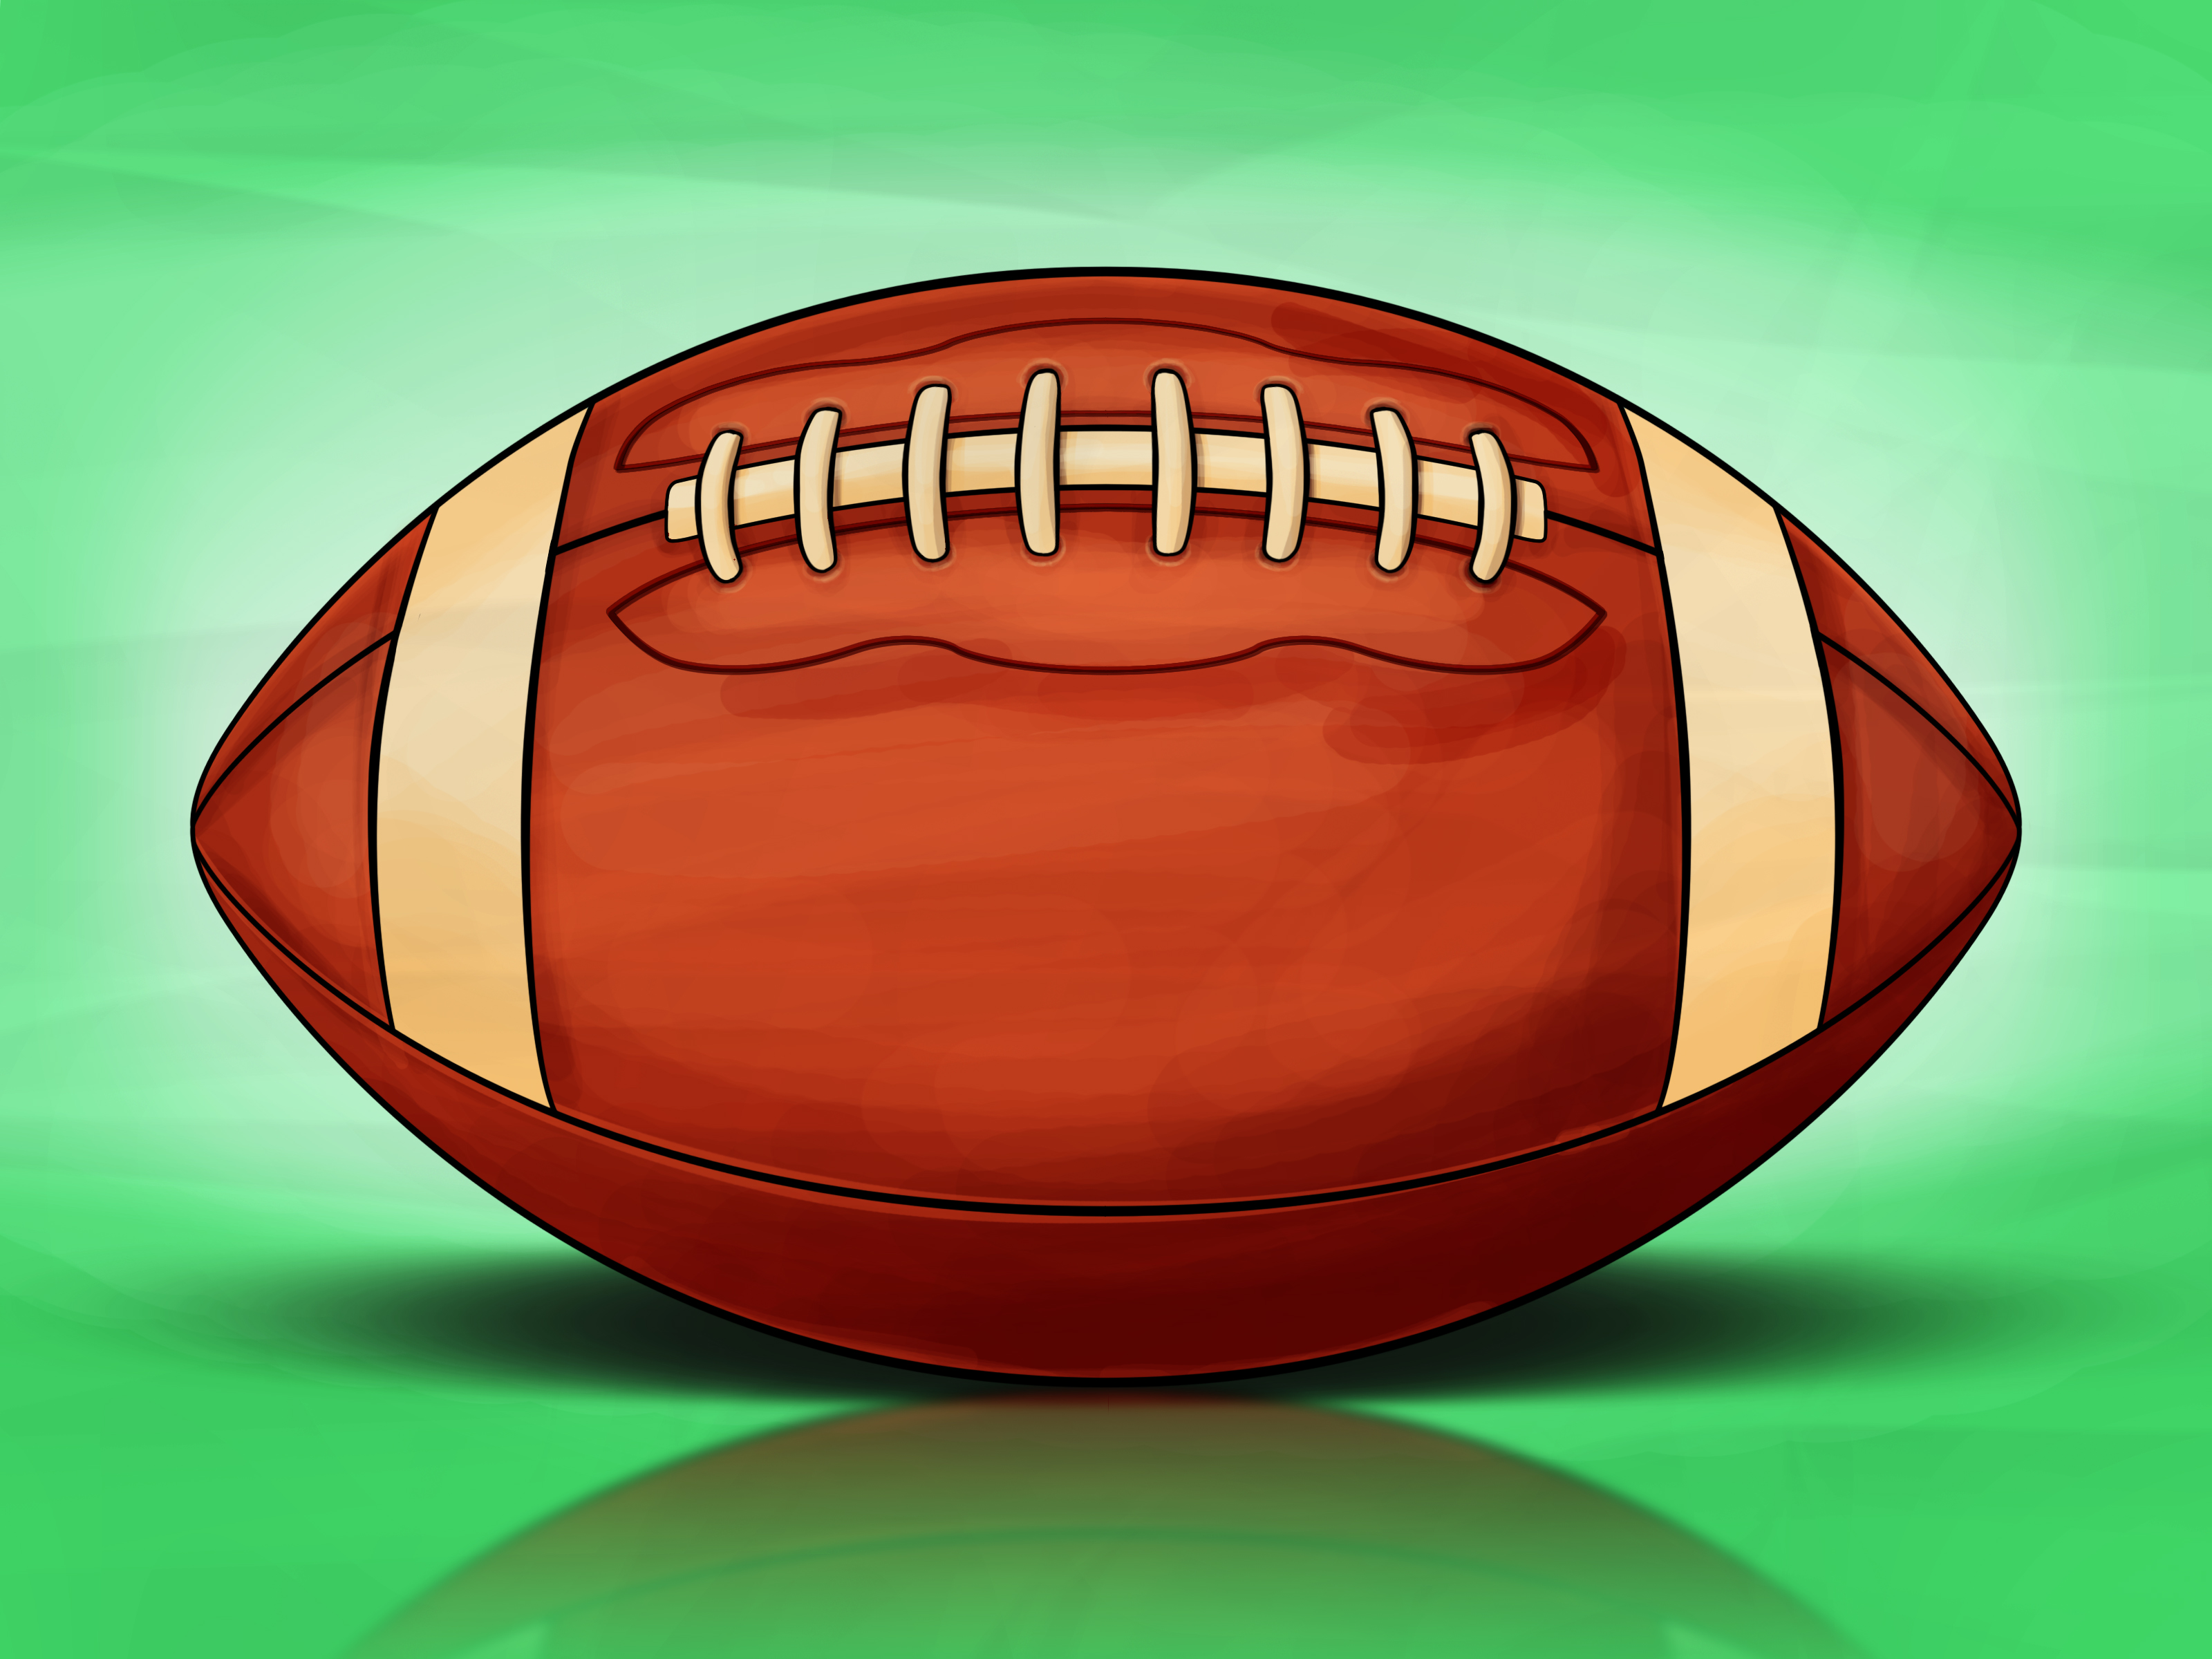 How to Draw a Football: 13 Steps (with Pictures) - wikiHow